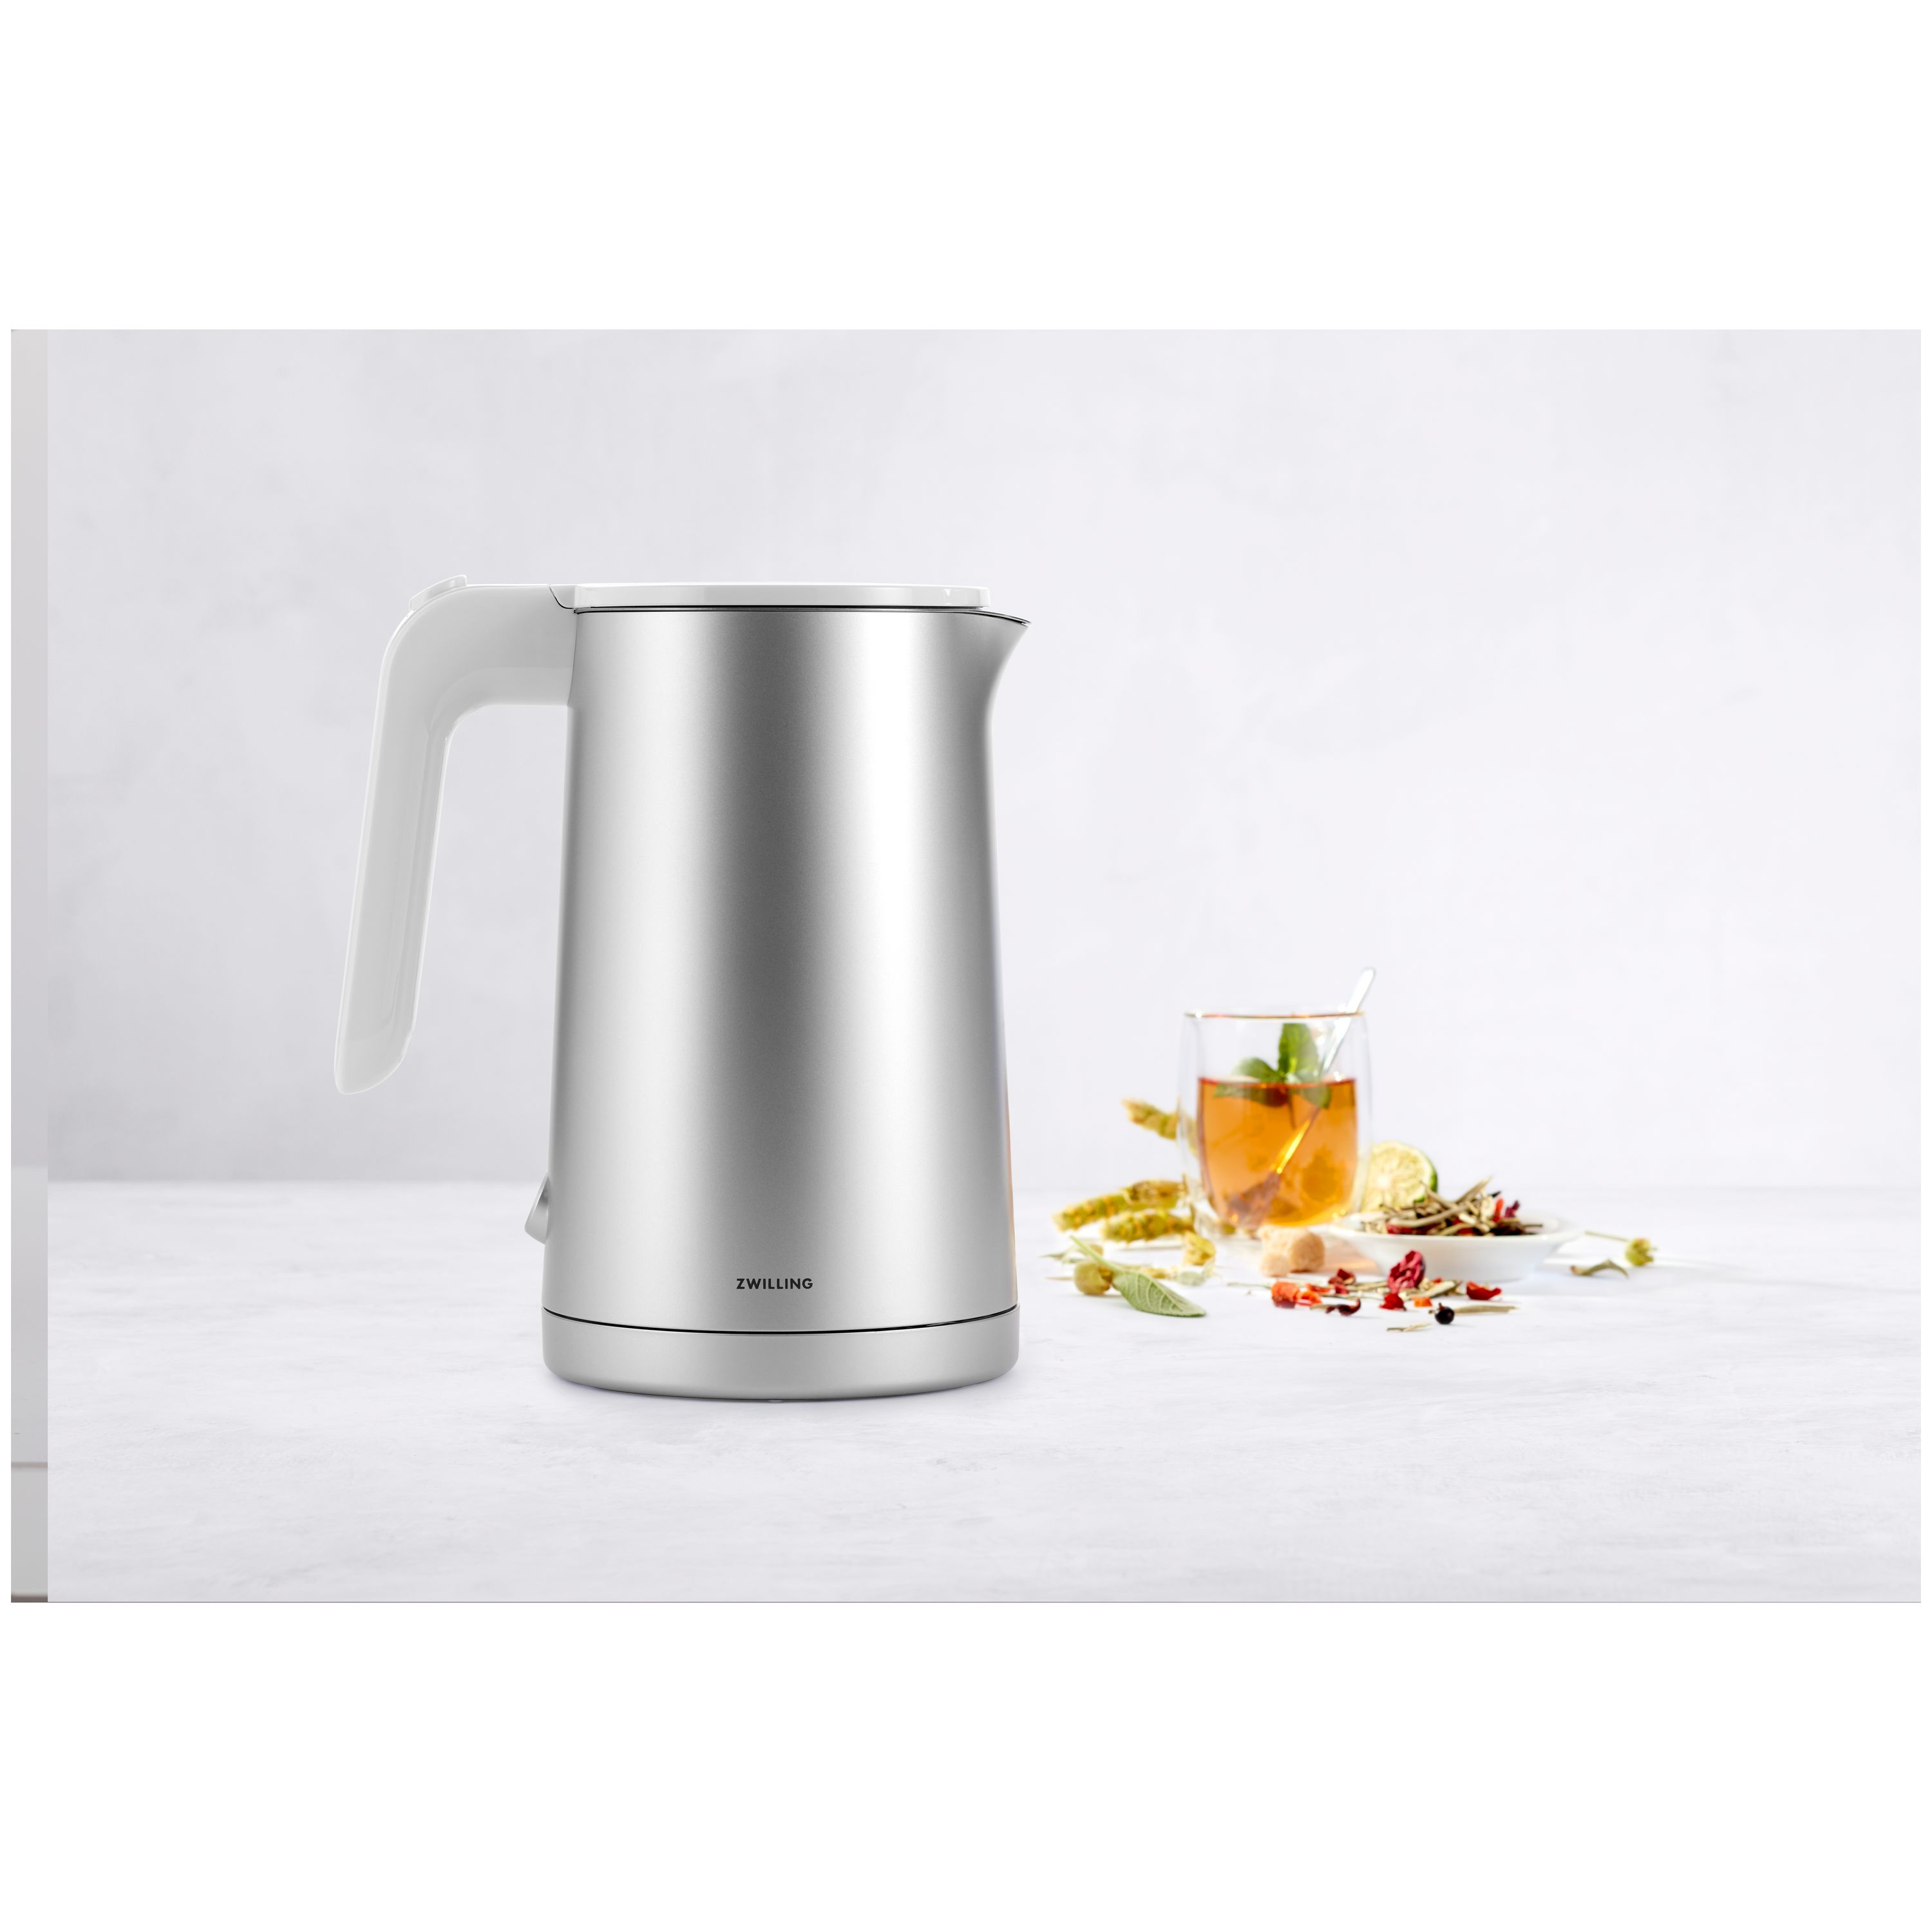 Why I Love the ZWILLING Enfinigy 1-Liter Electric Kettle: Tried & Tested